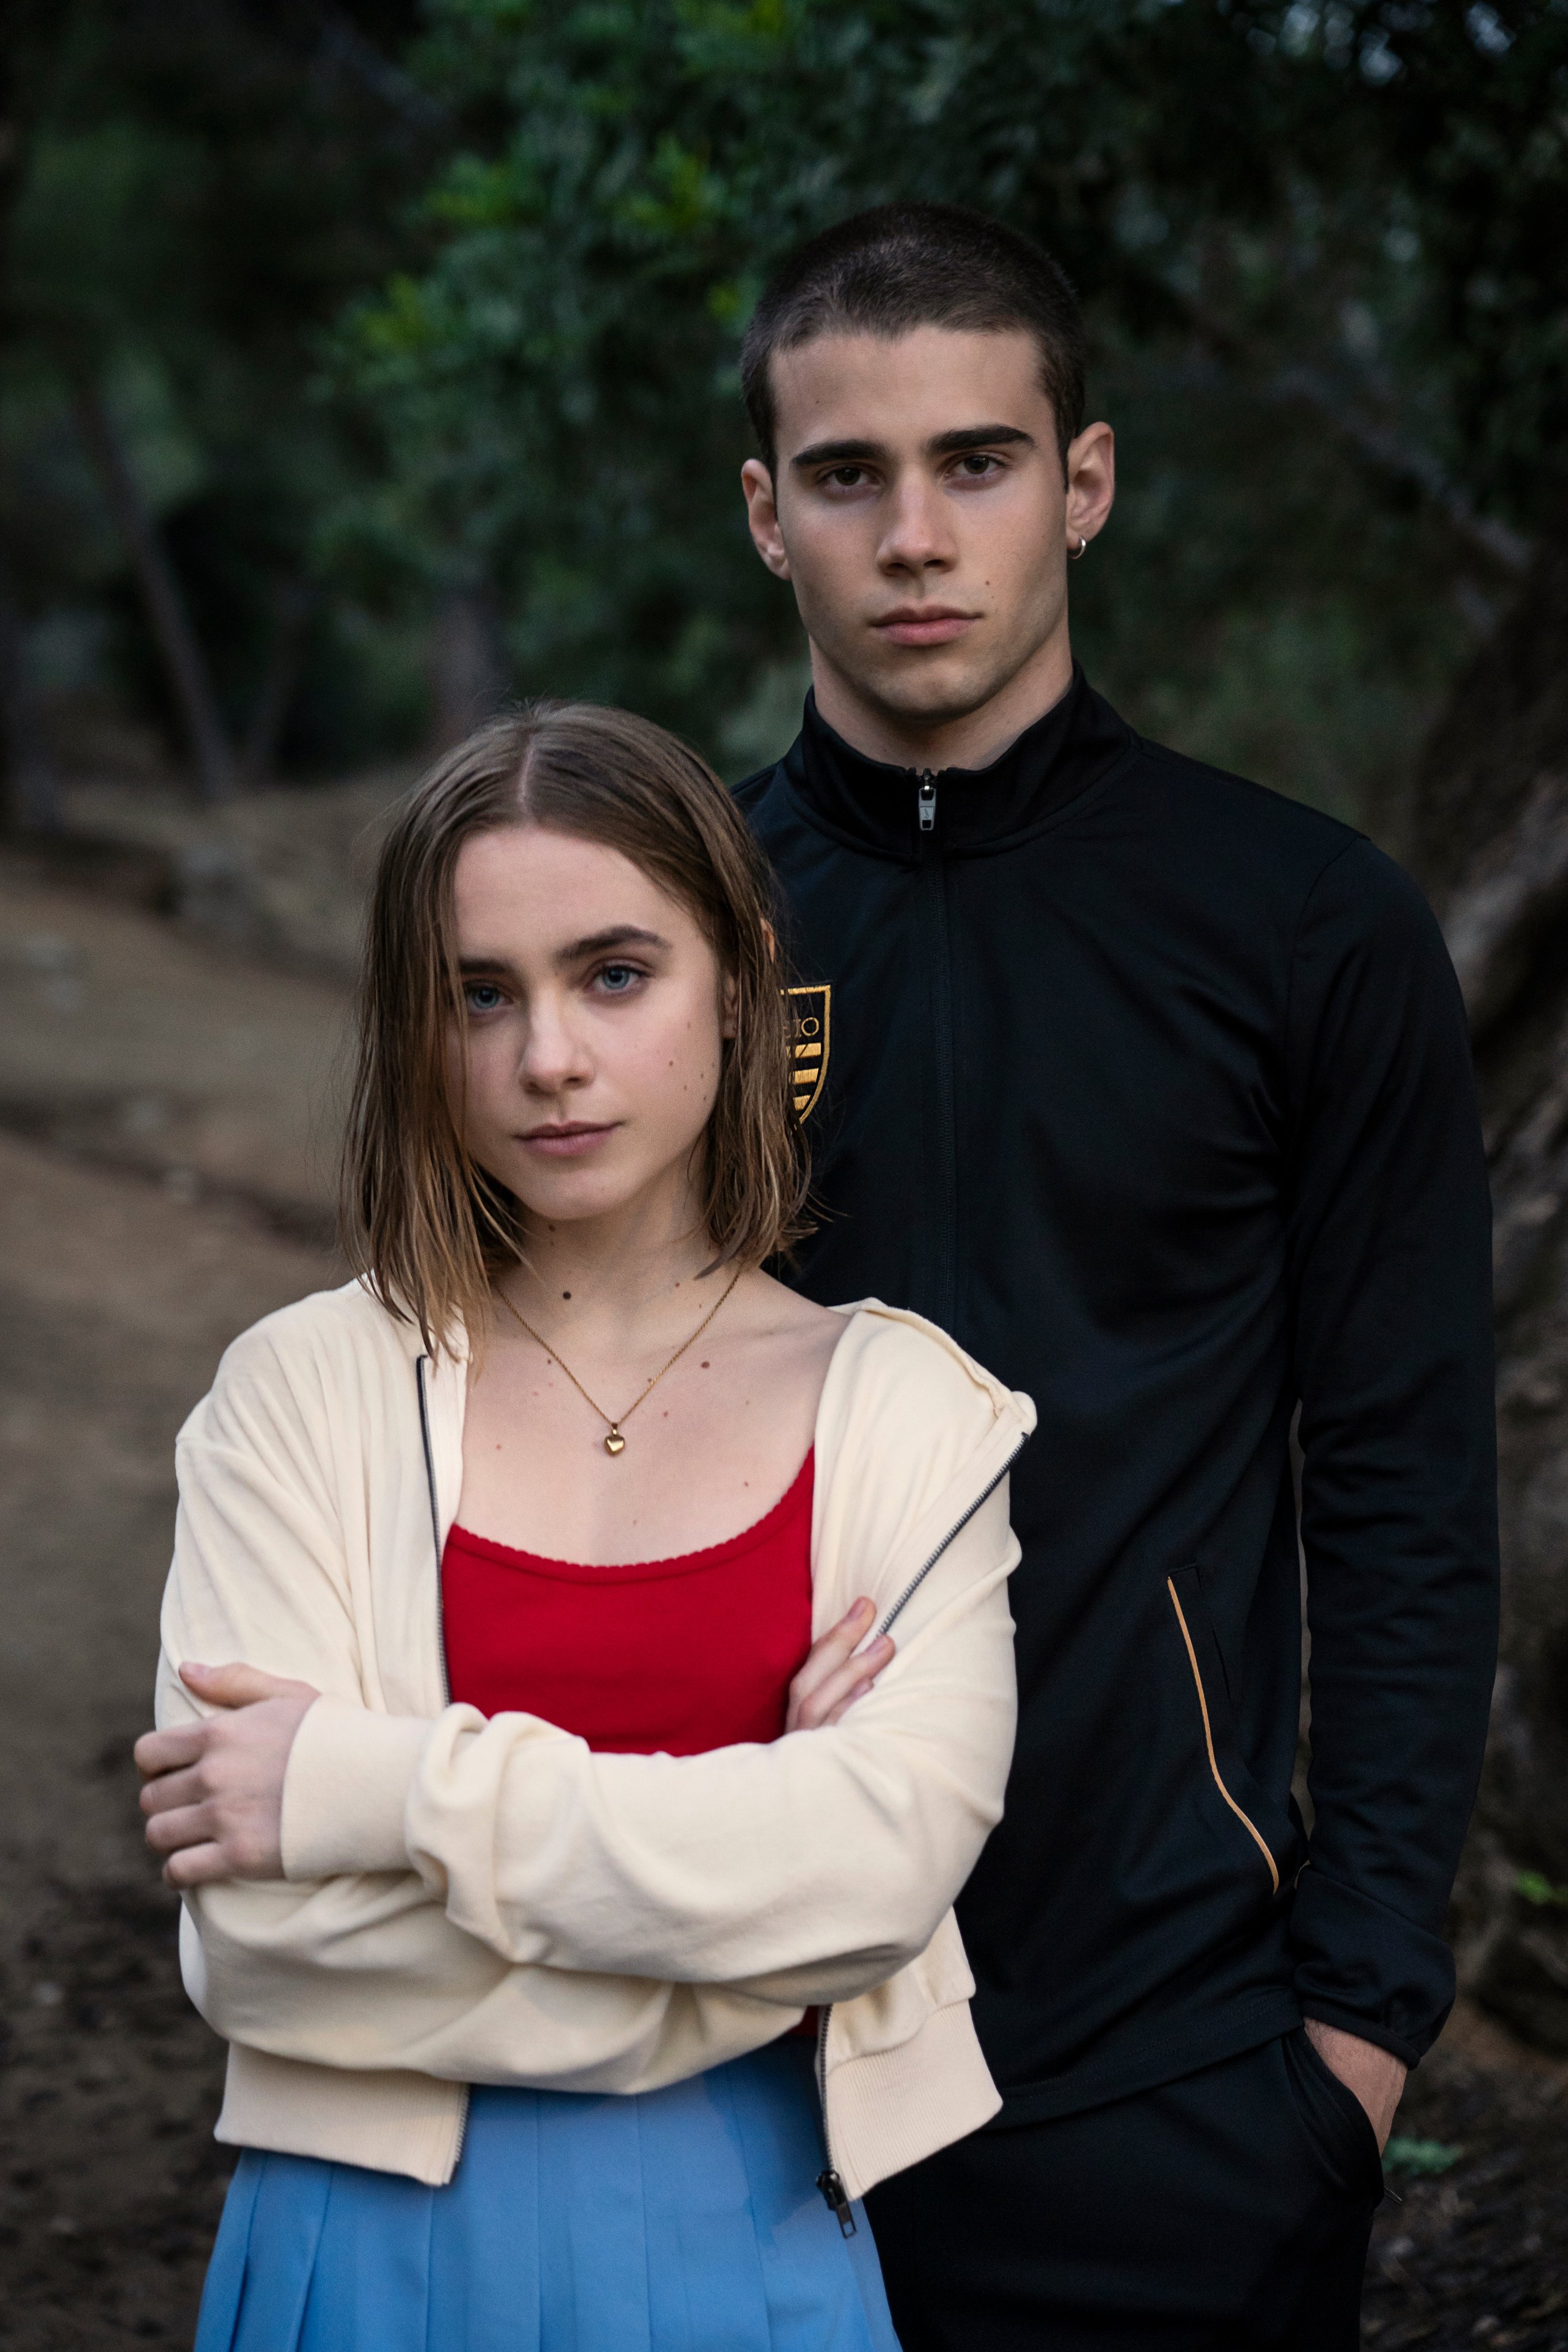 Wattpad heartbreaker Ares and daring heroine Raquel will be played by Julio Fernández and Clara Galle